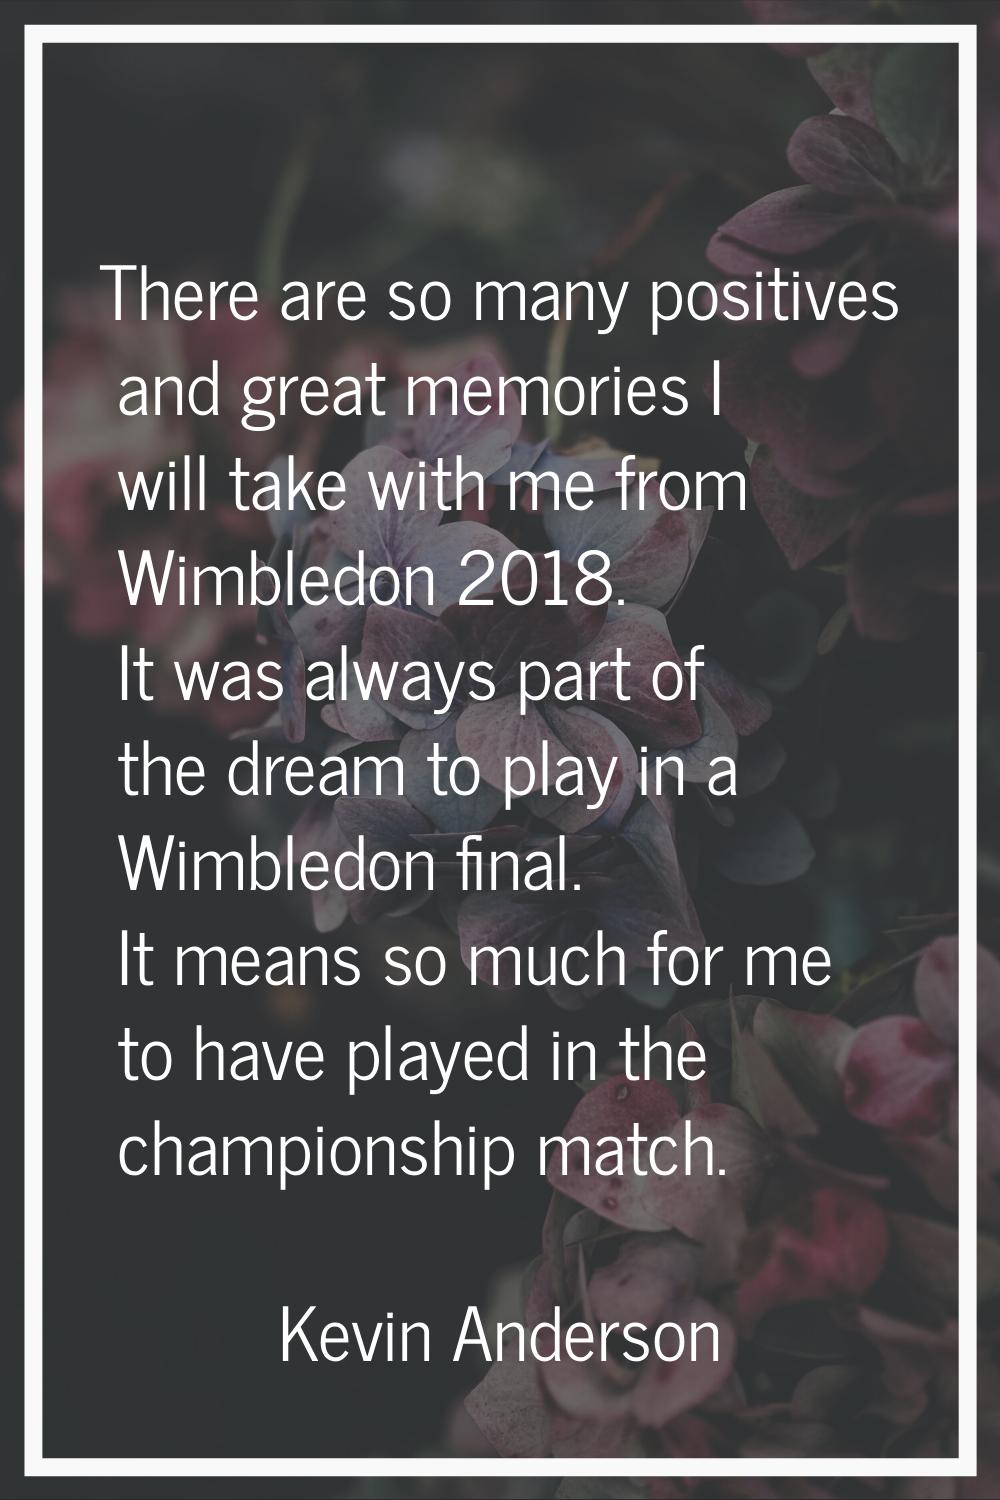 There are so many positives and great memories I will take with me from Wimbledon 2018. It was alwa